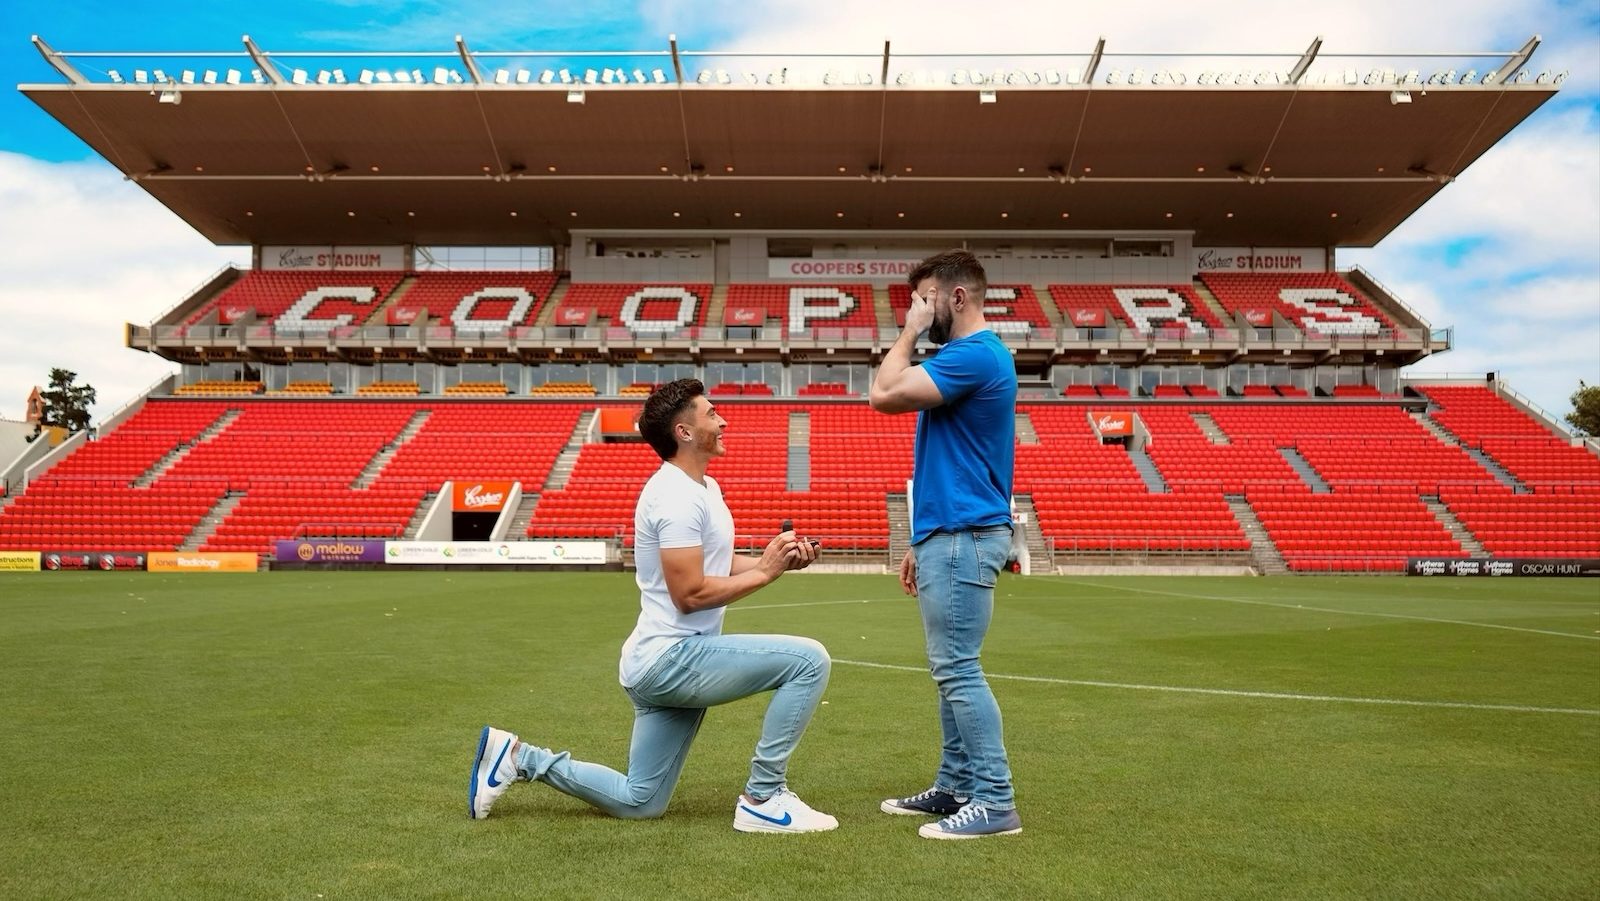 Josh Cavallo, the first openly gay top division male soccer player, proposed to his partner on his team’s field